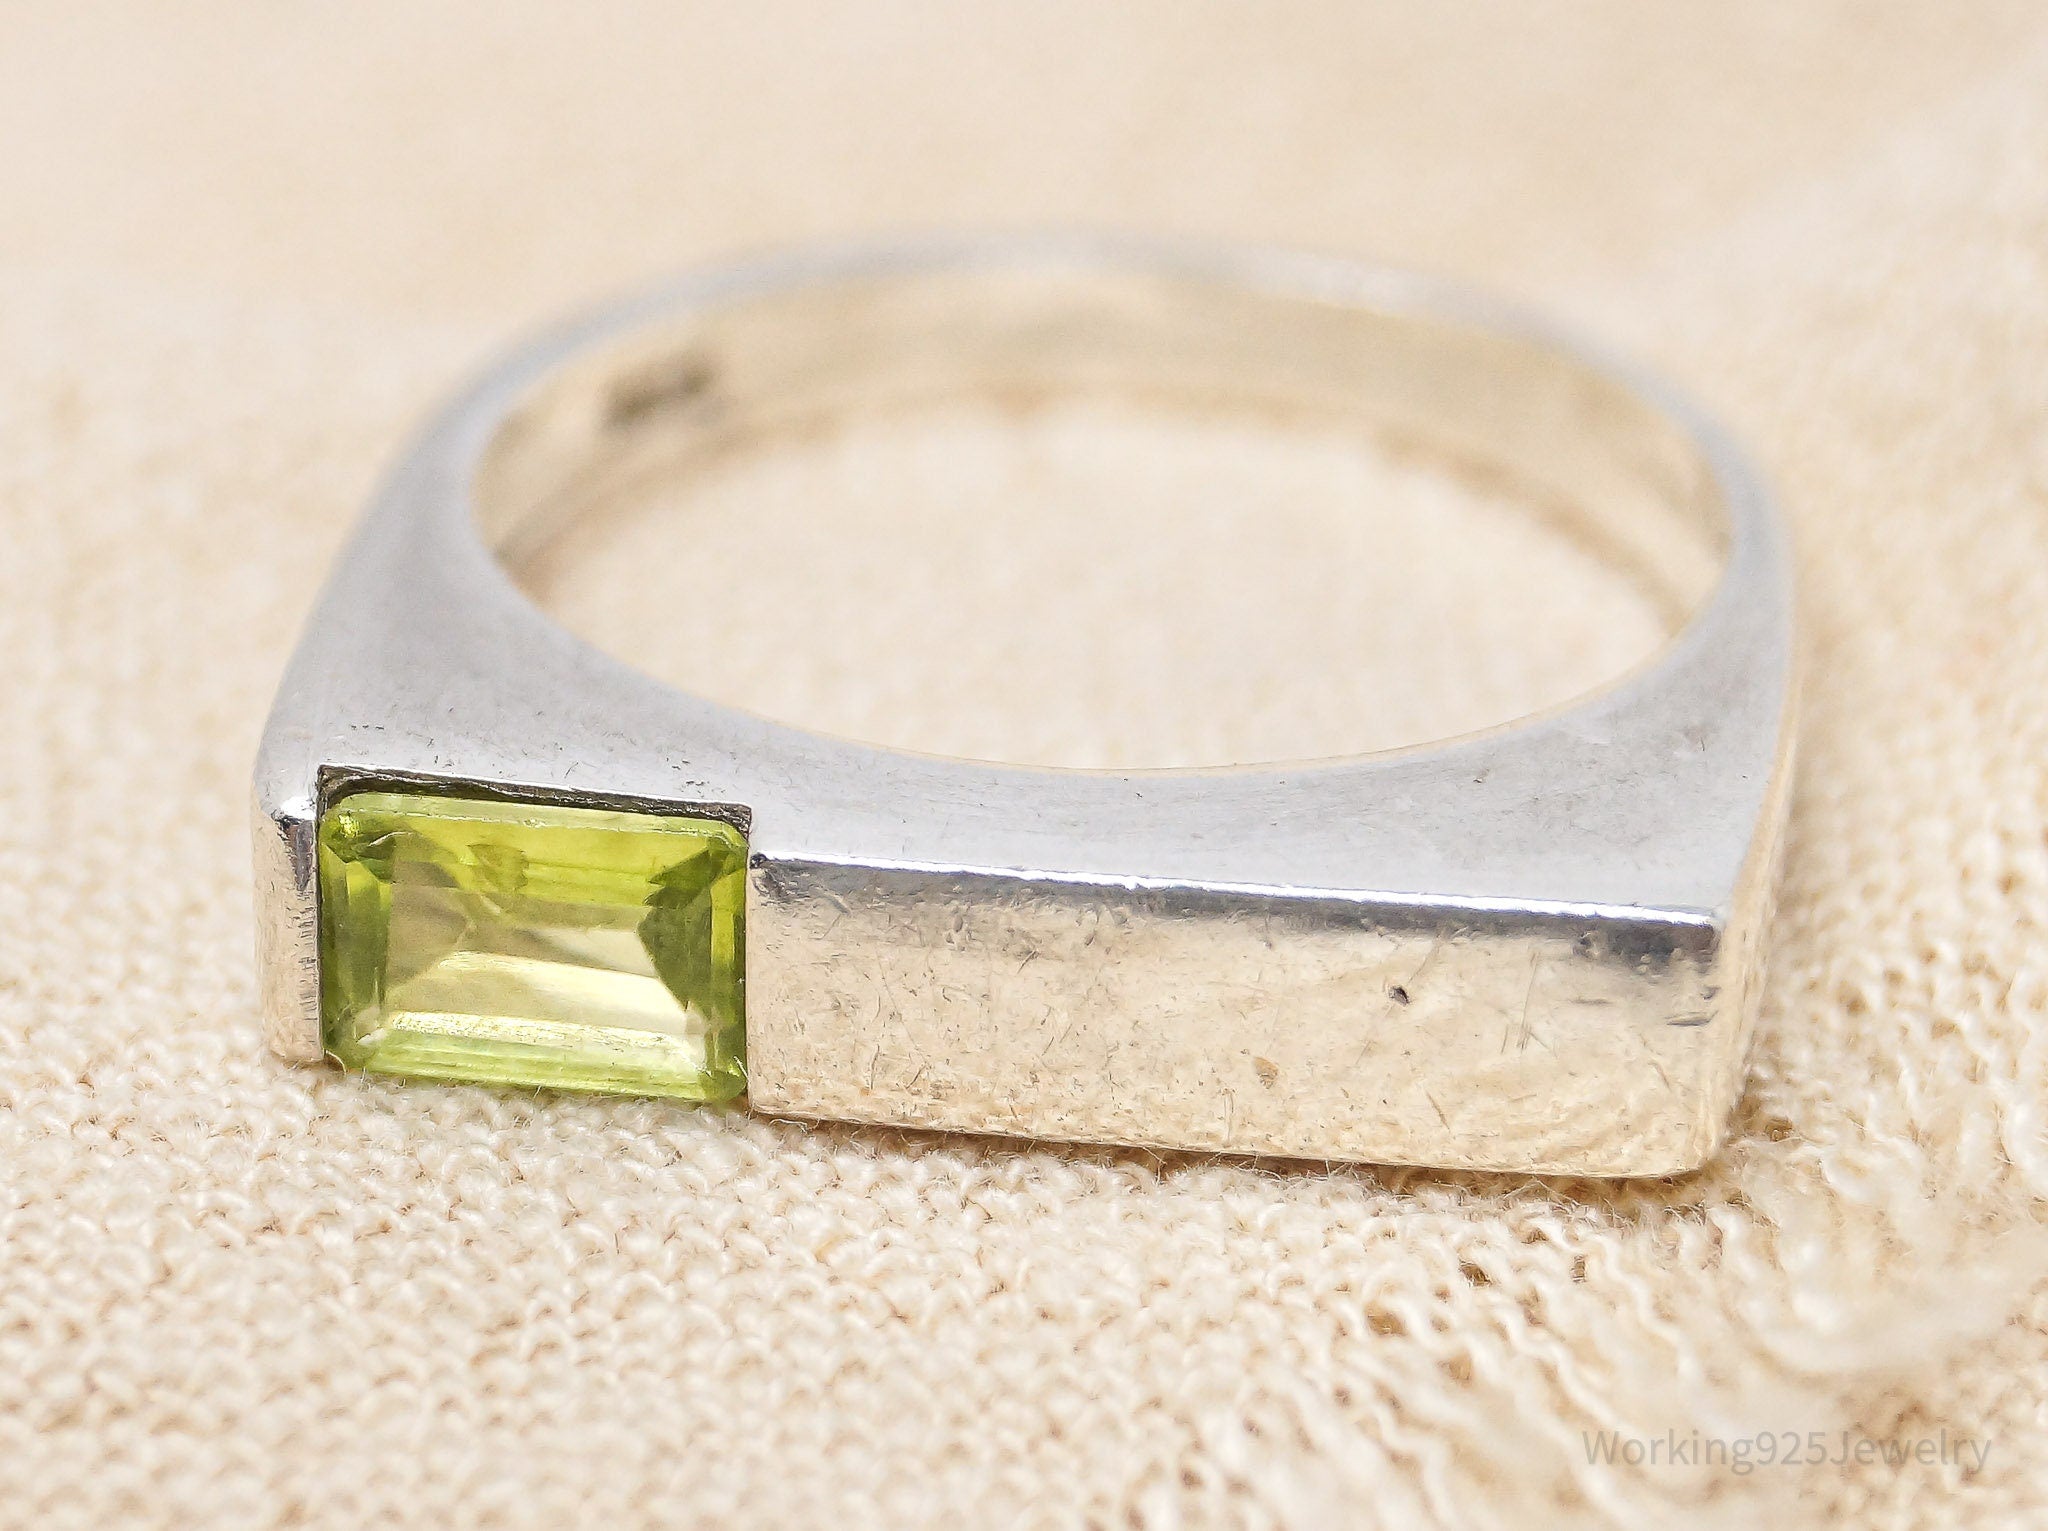 Vintage Peridot Sterling Silver Ring - Size 7.75